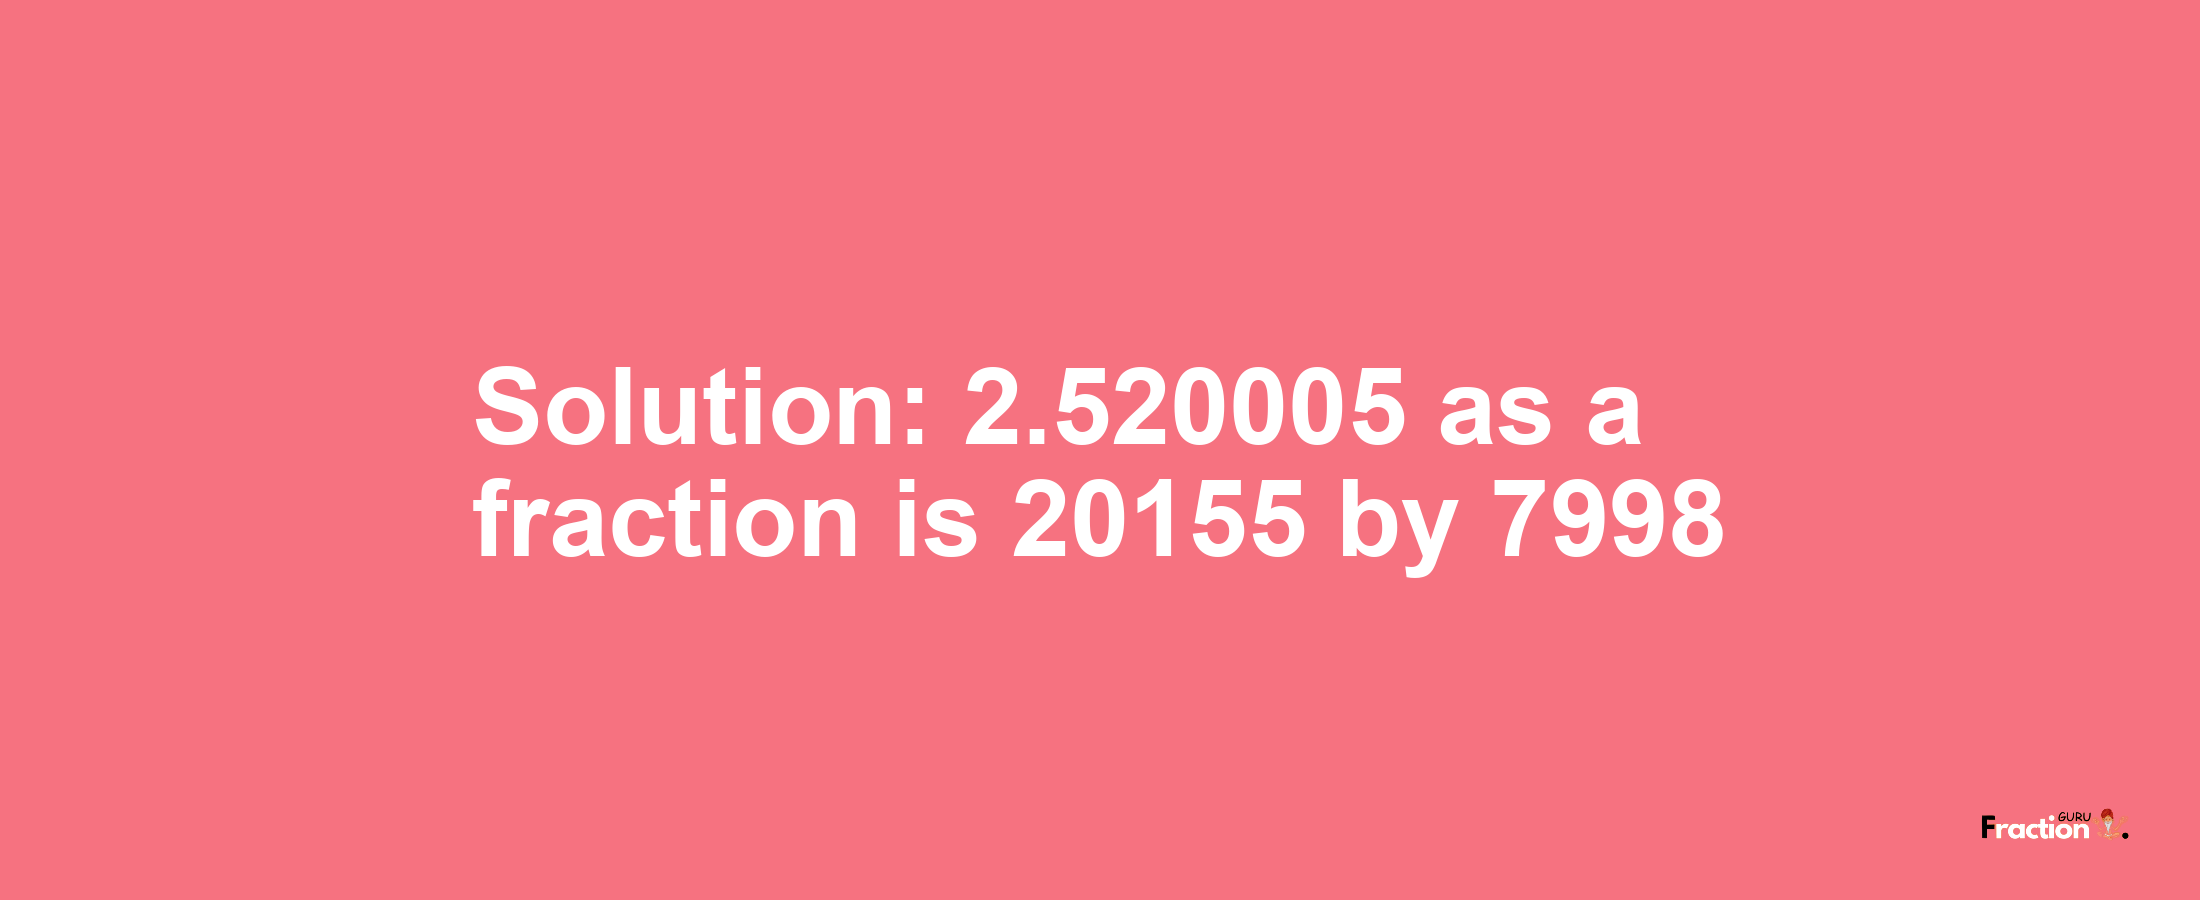 Solution:2.520005 as a fraction is 20155/7998